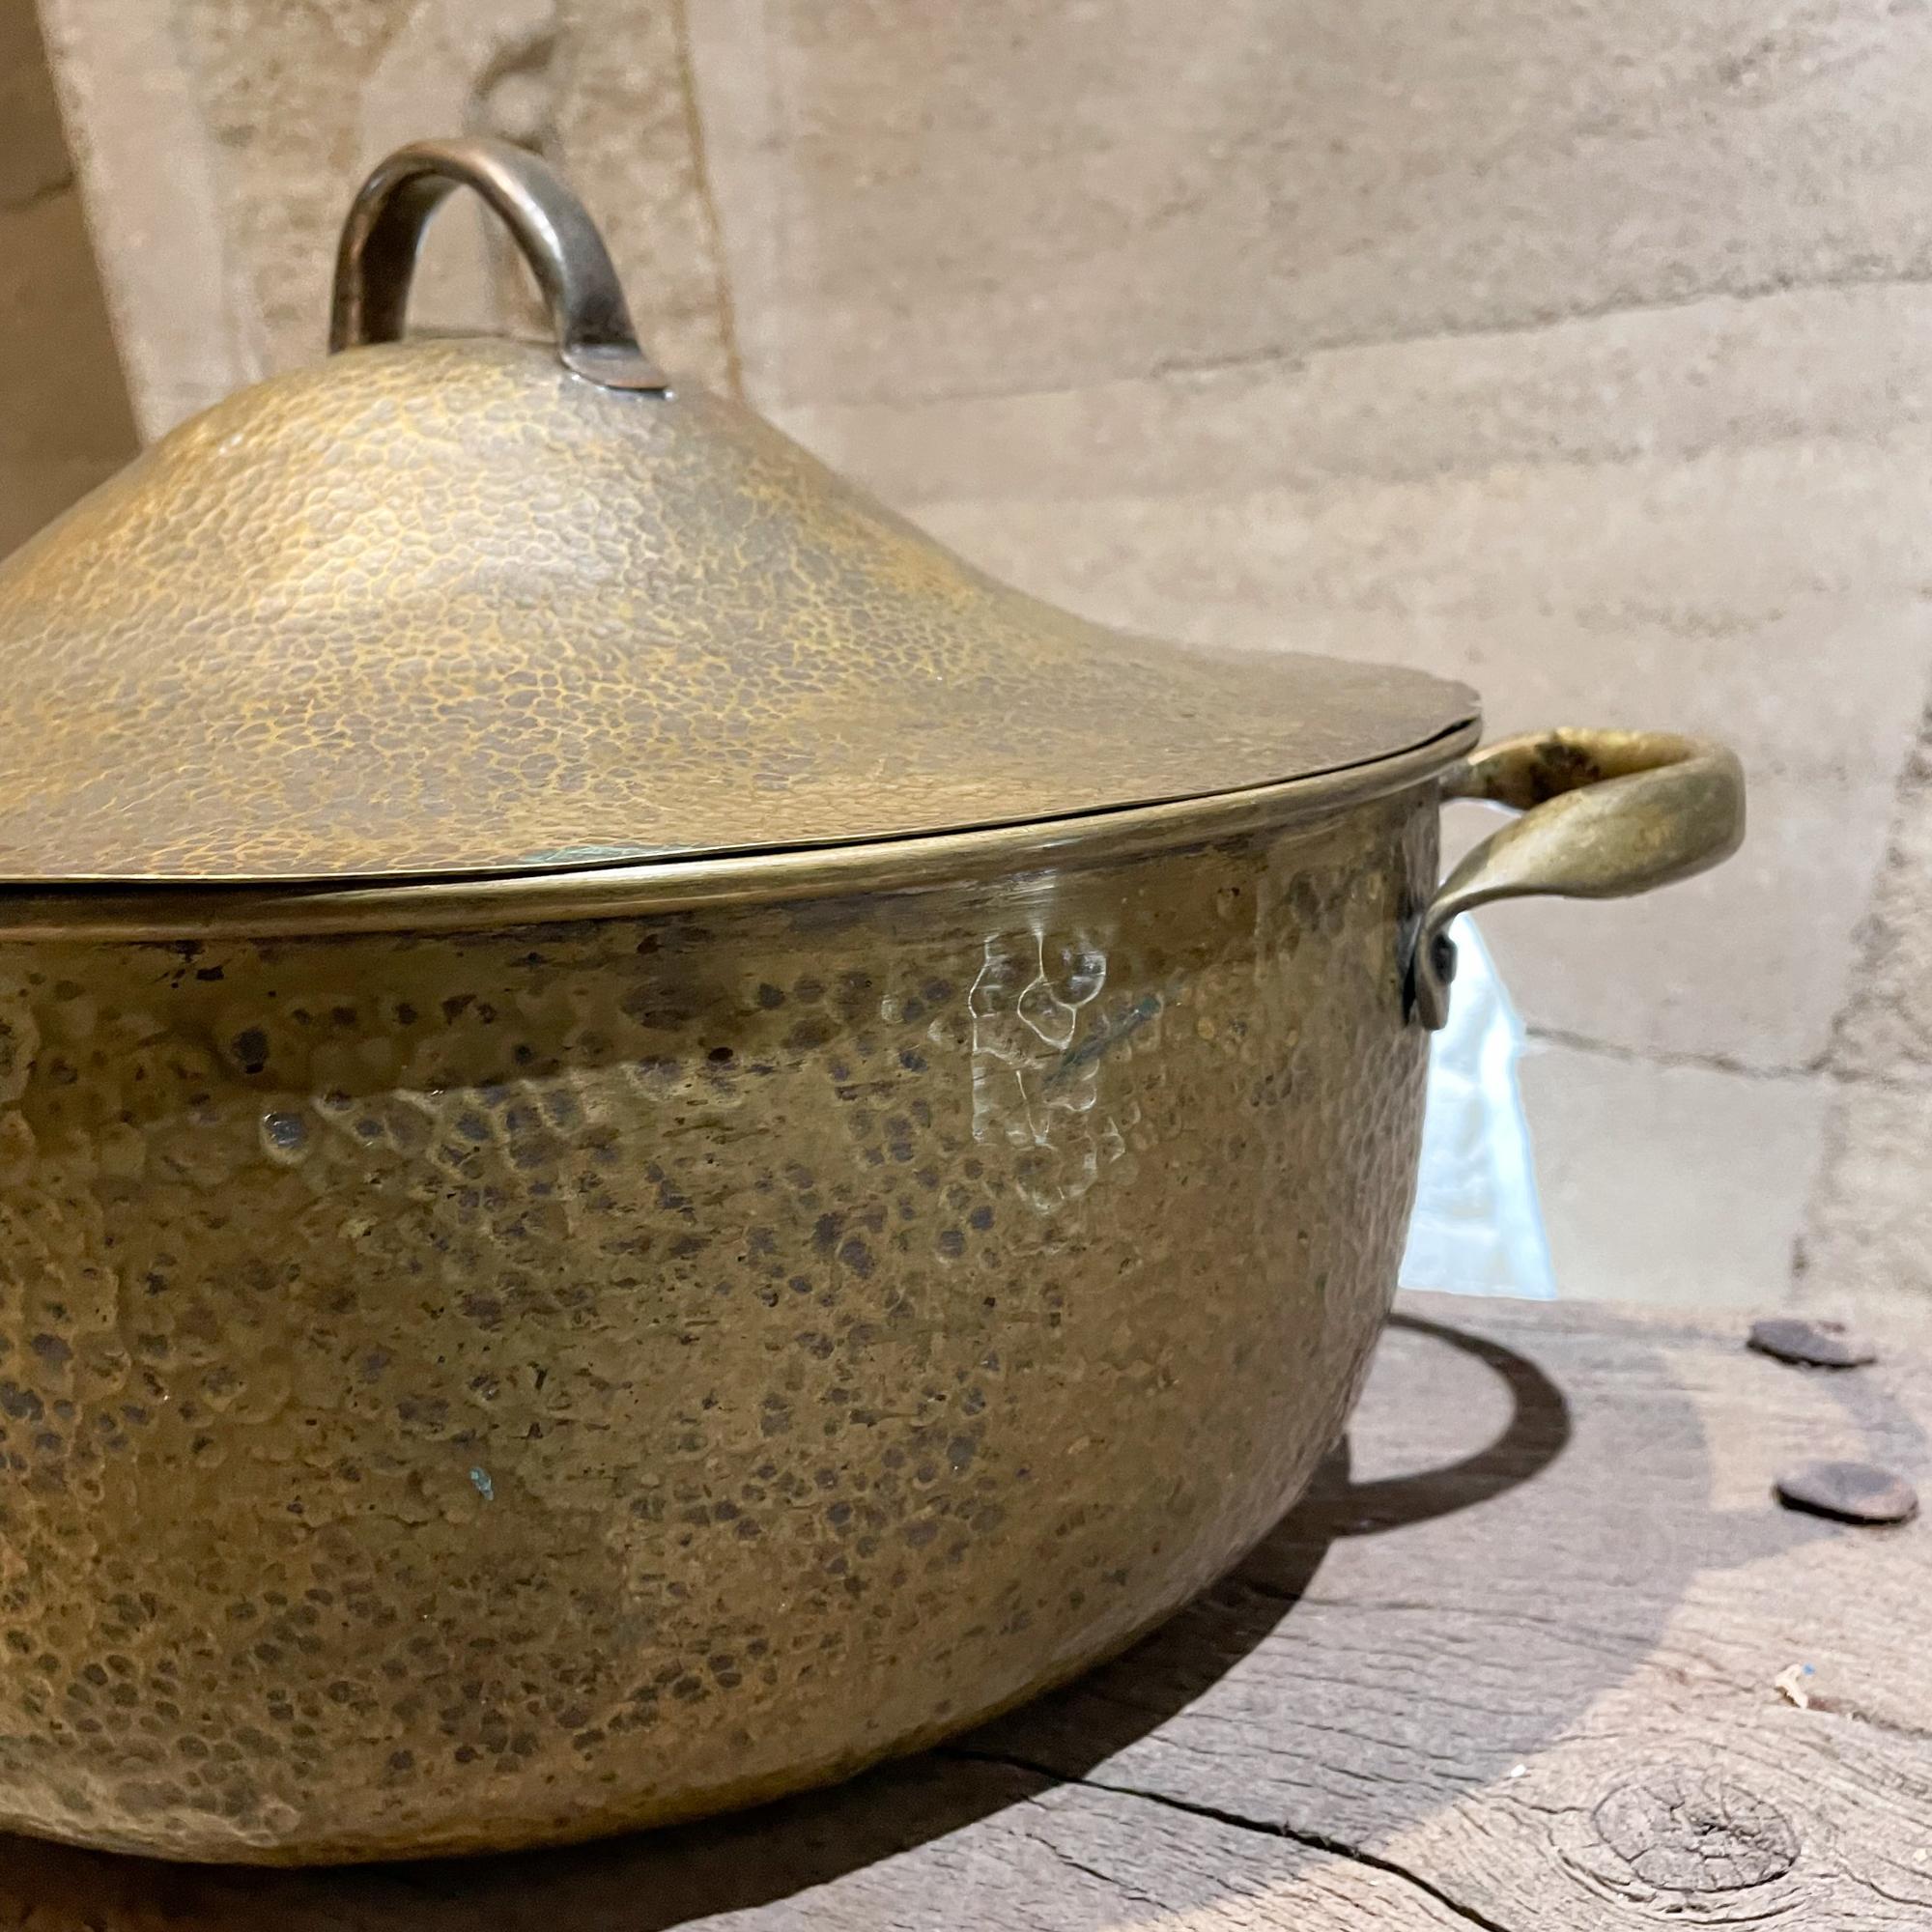 Mexican Mexico Lovely Covered Large Pot Golden Hammered Brass 1960s Vintage Cookware